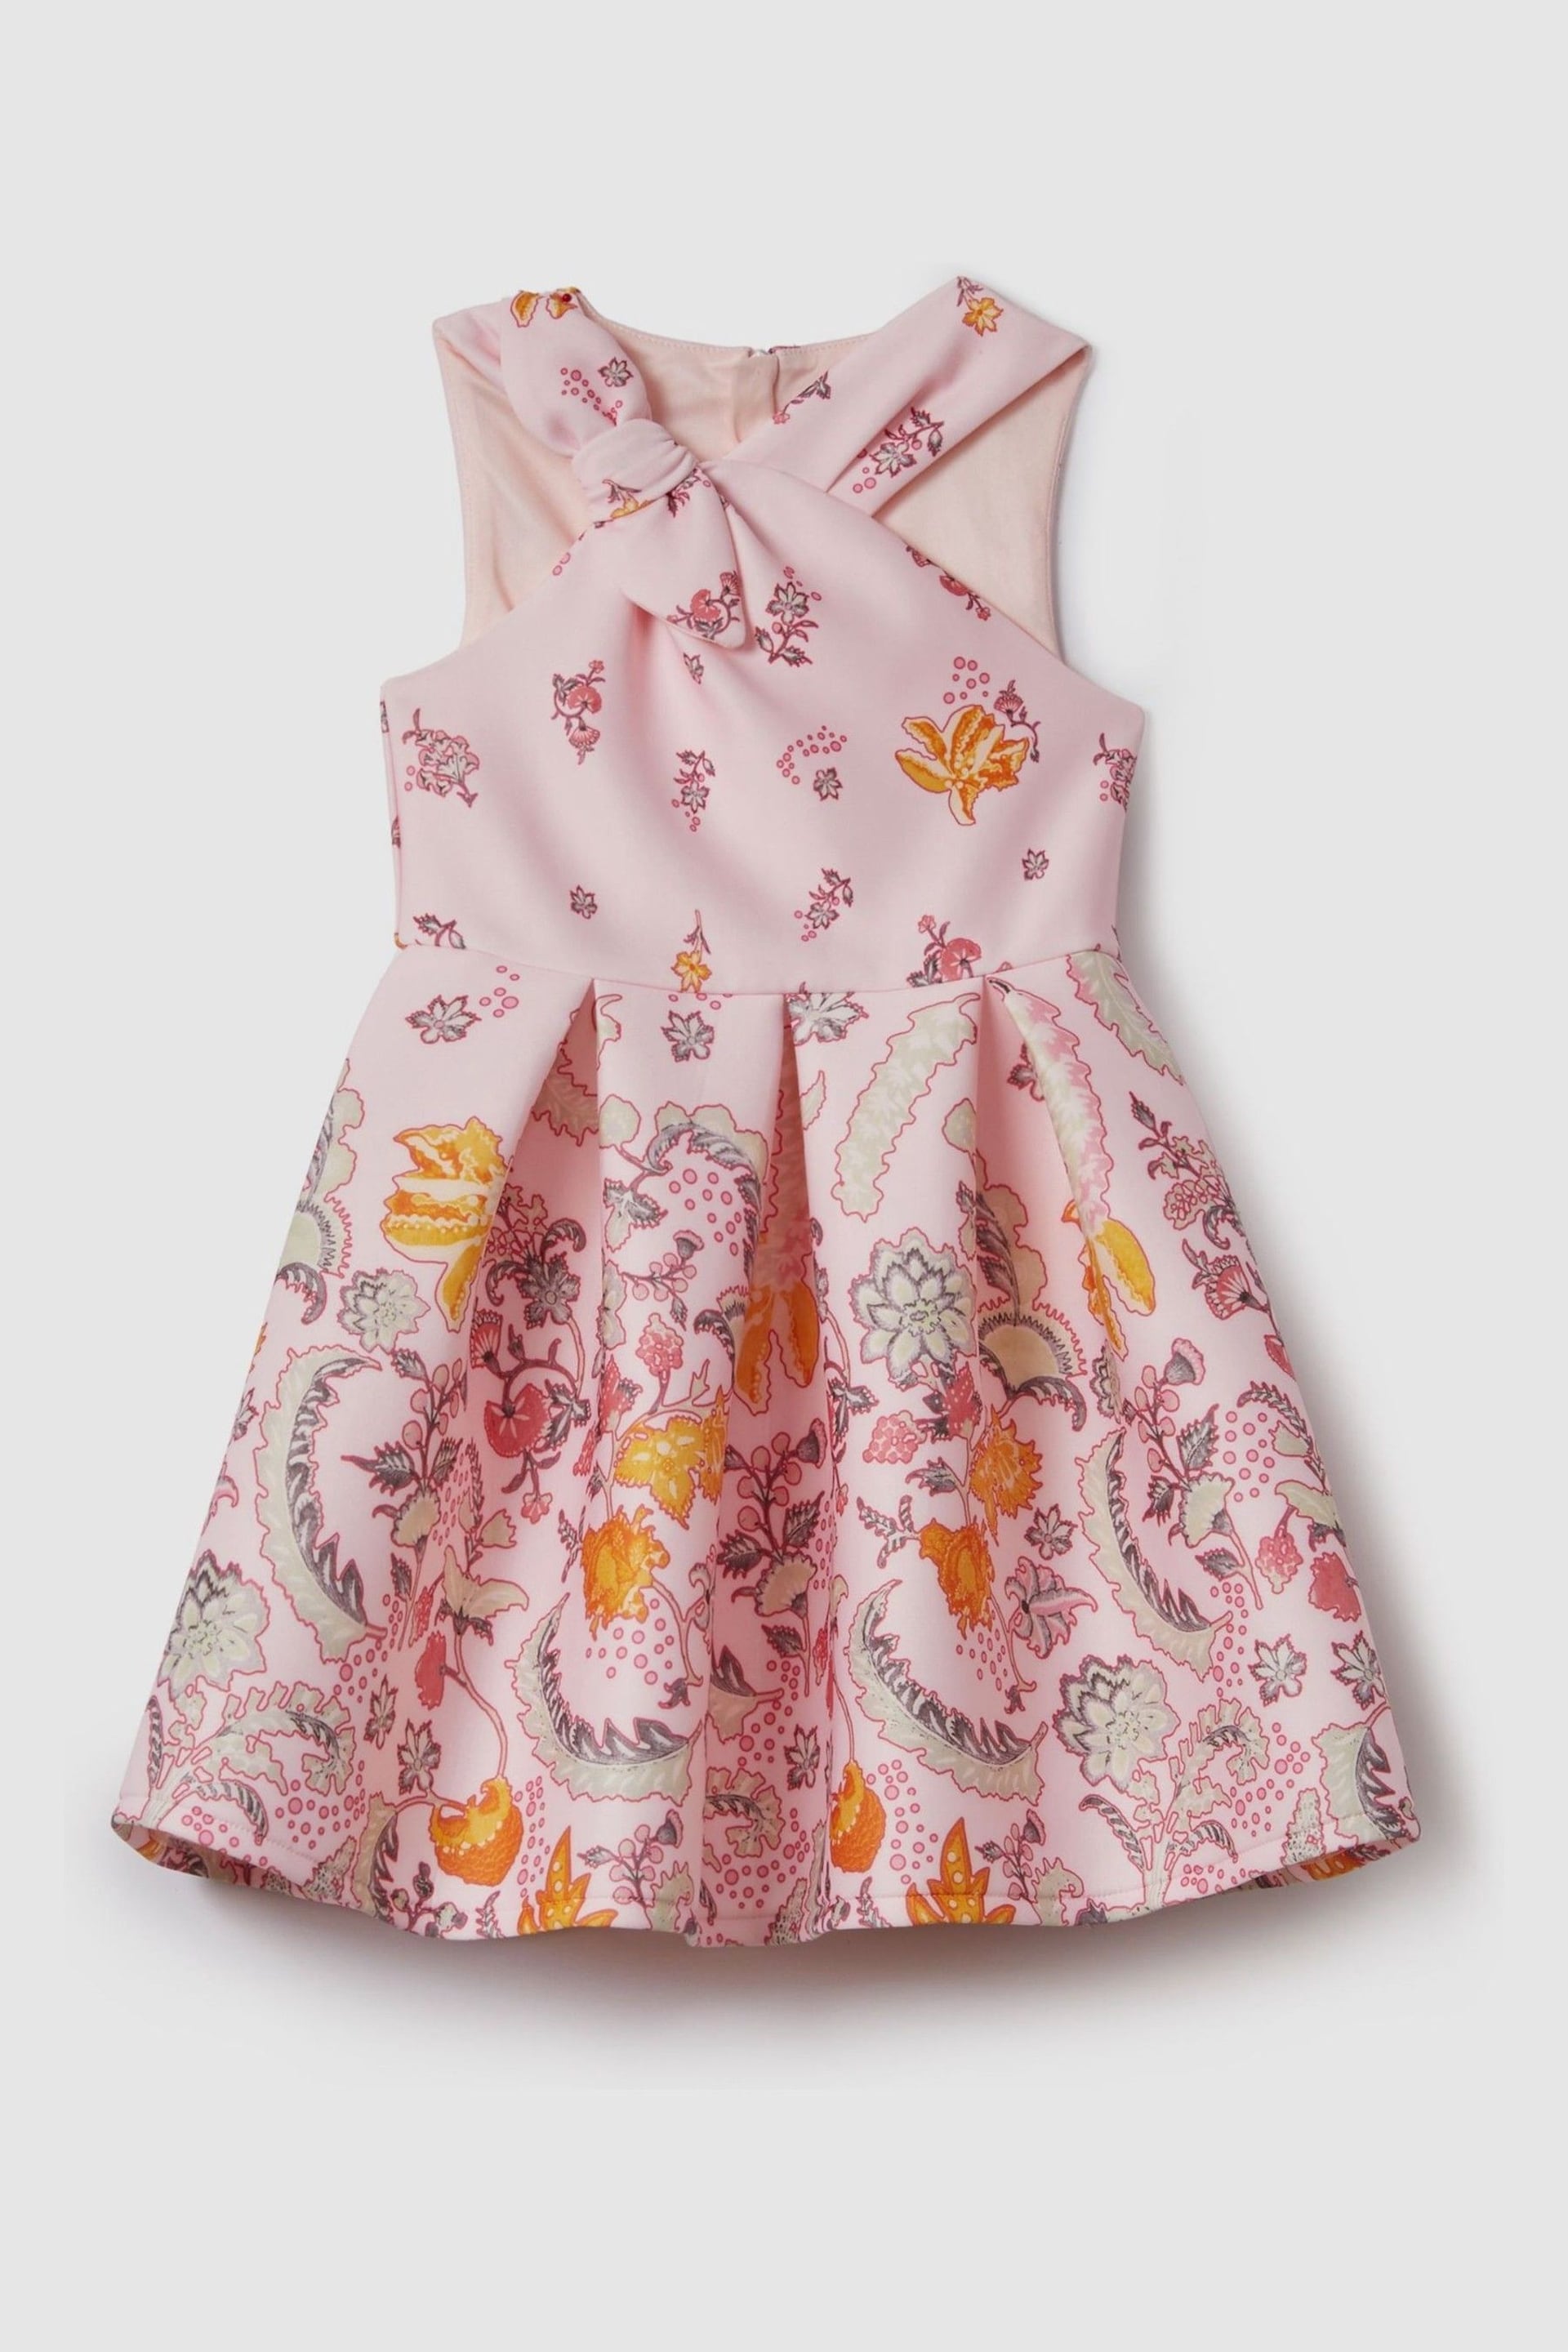 Reiss Pink Alice Teen Scuba Bow Fit-and-Flare Dress - Image 1 of 6